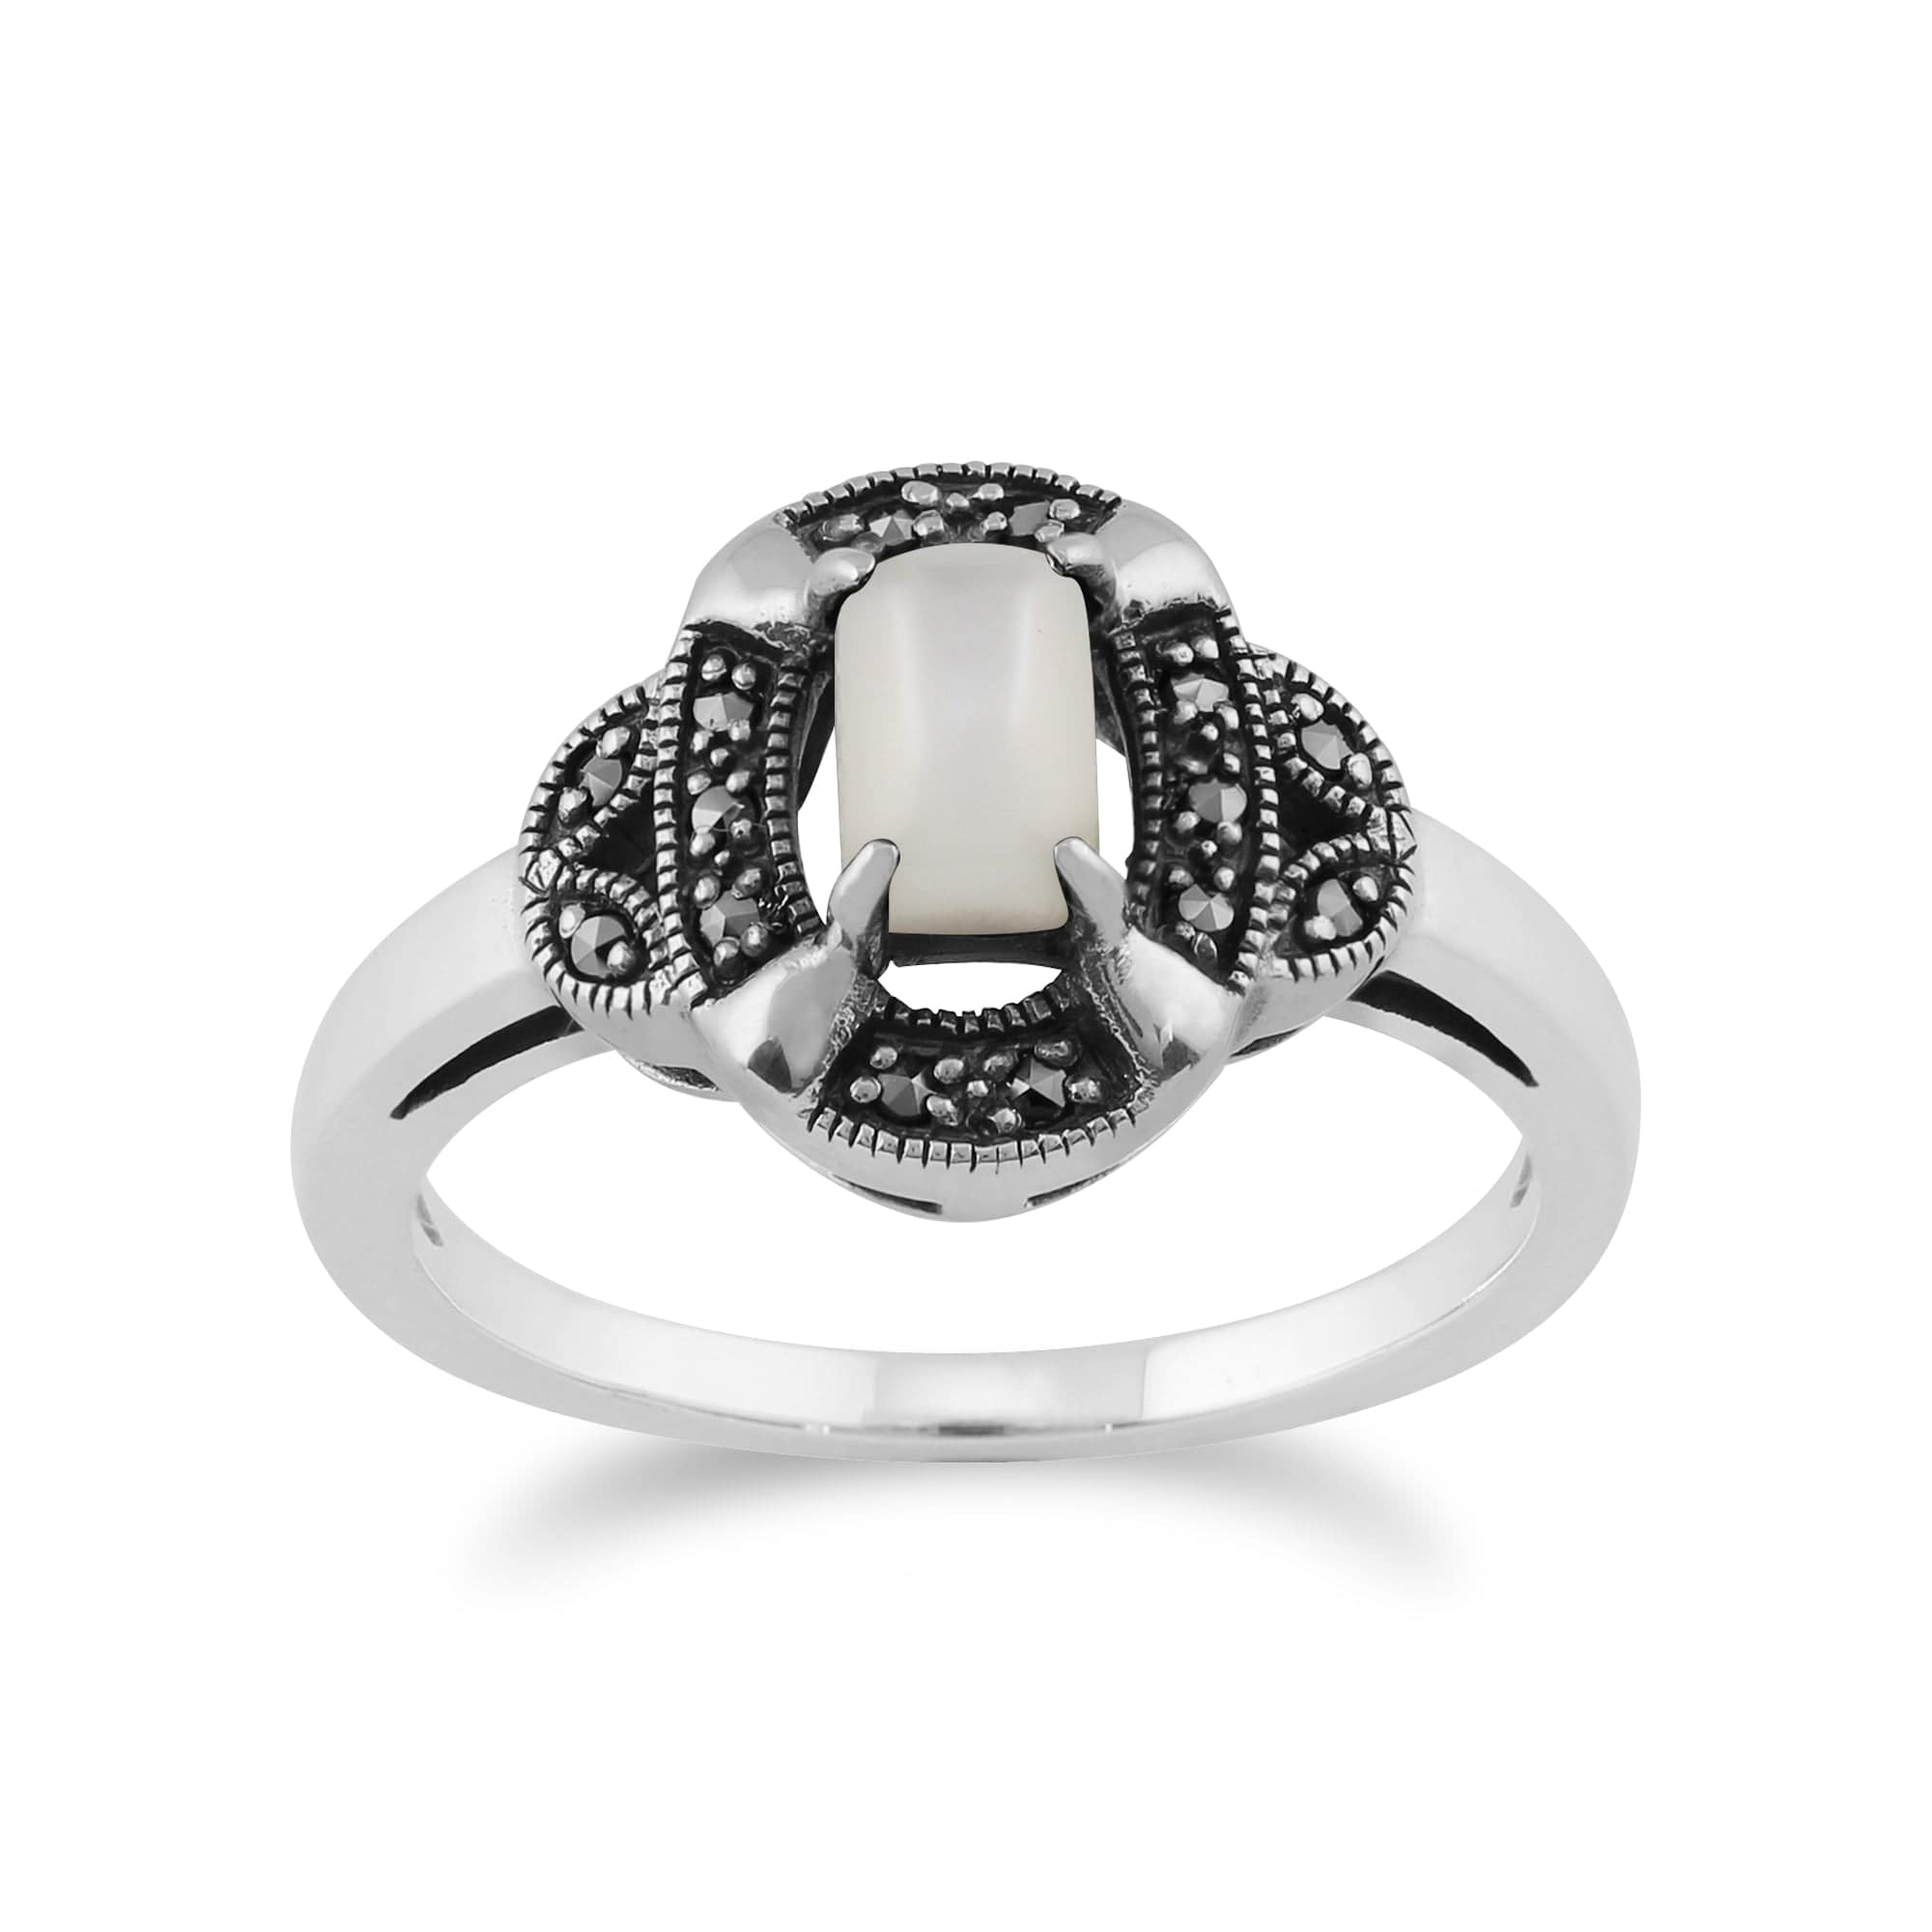 Gemondo 925 Sterling Silver 0.50ct Mother of Pearl & Marcasite Art Deco Ring Image 1